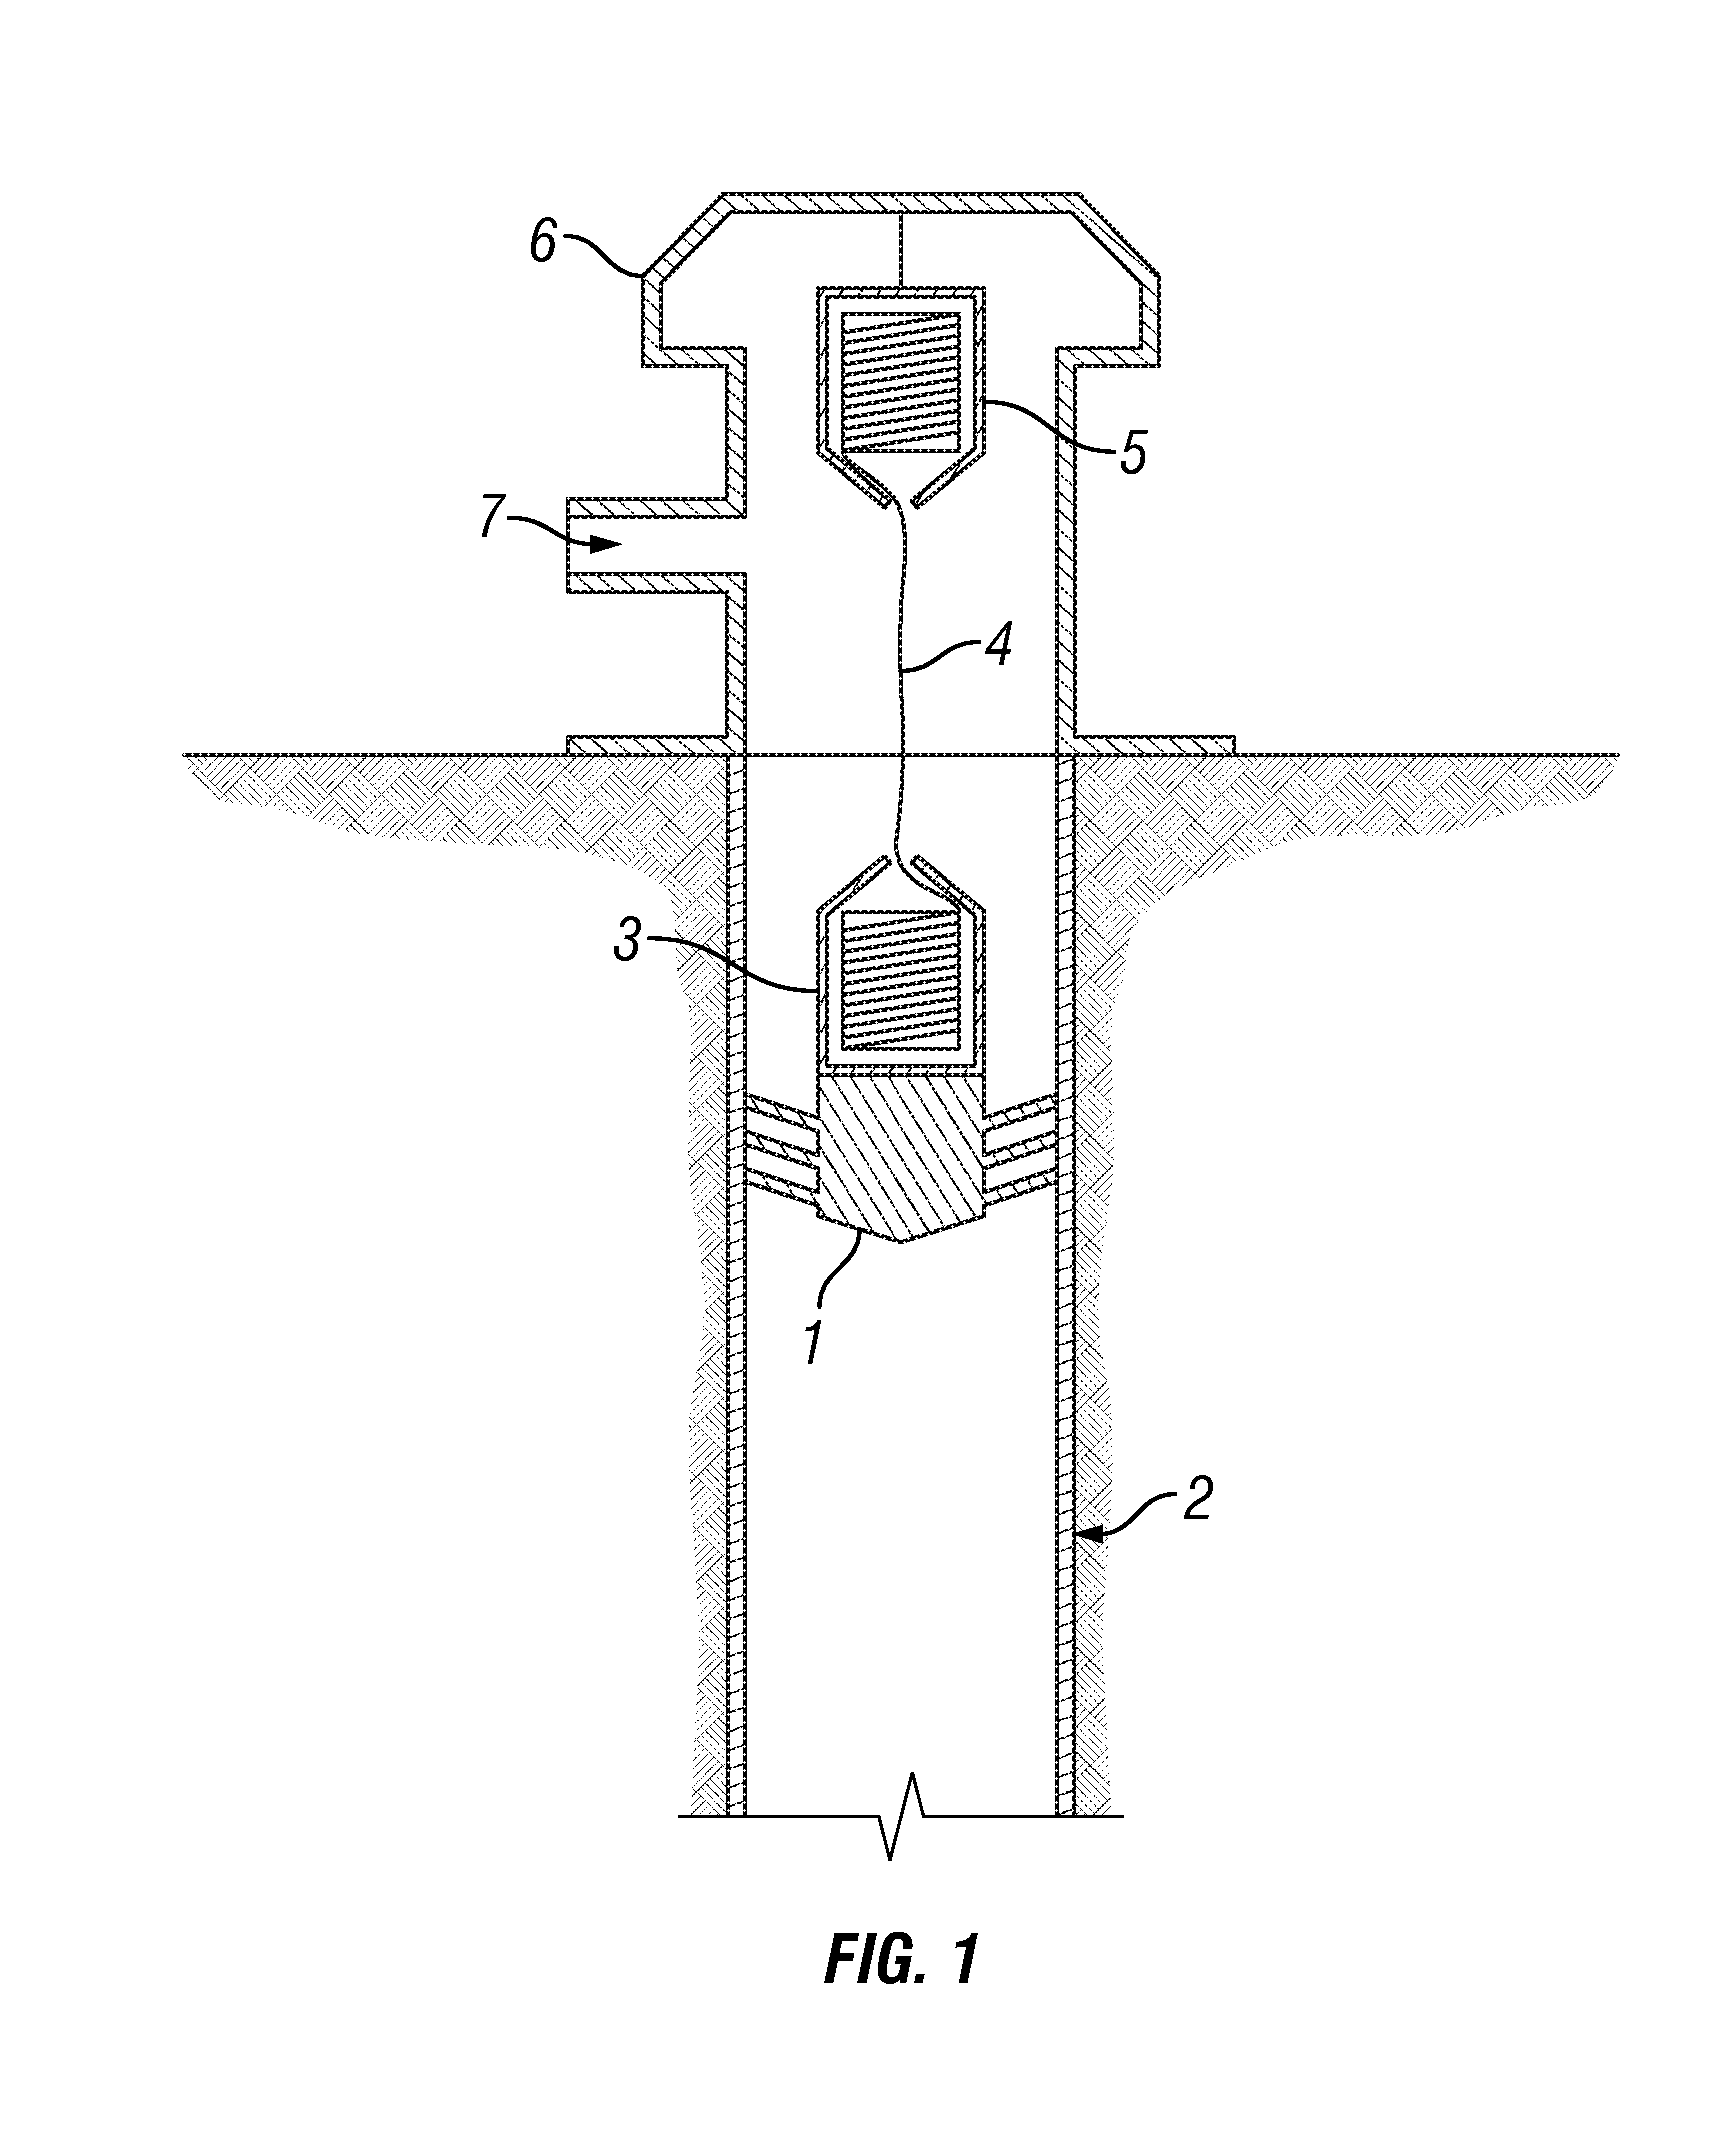 Equipment and Methods for Deploying Line in a Wellbore